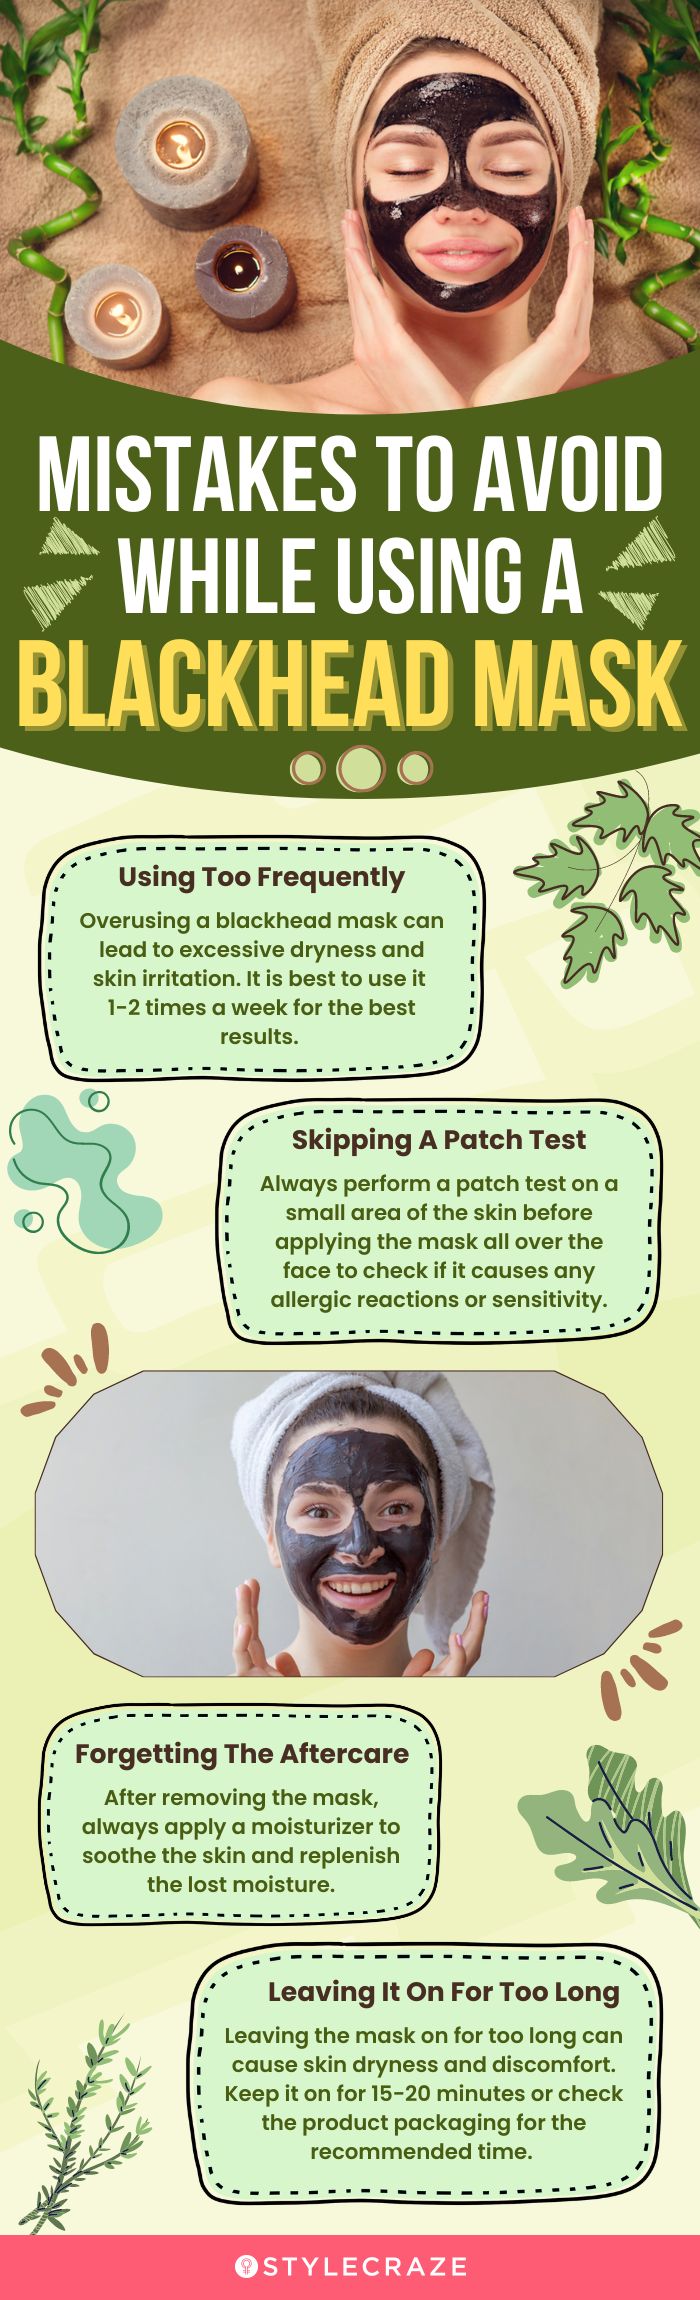 Mistakes To Avoid While Using A Blackhead Mask (infographic)